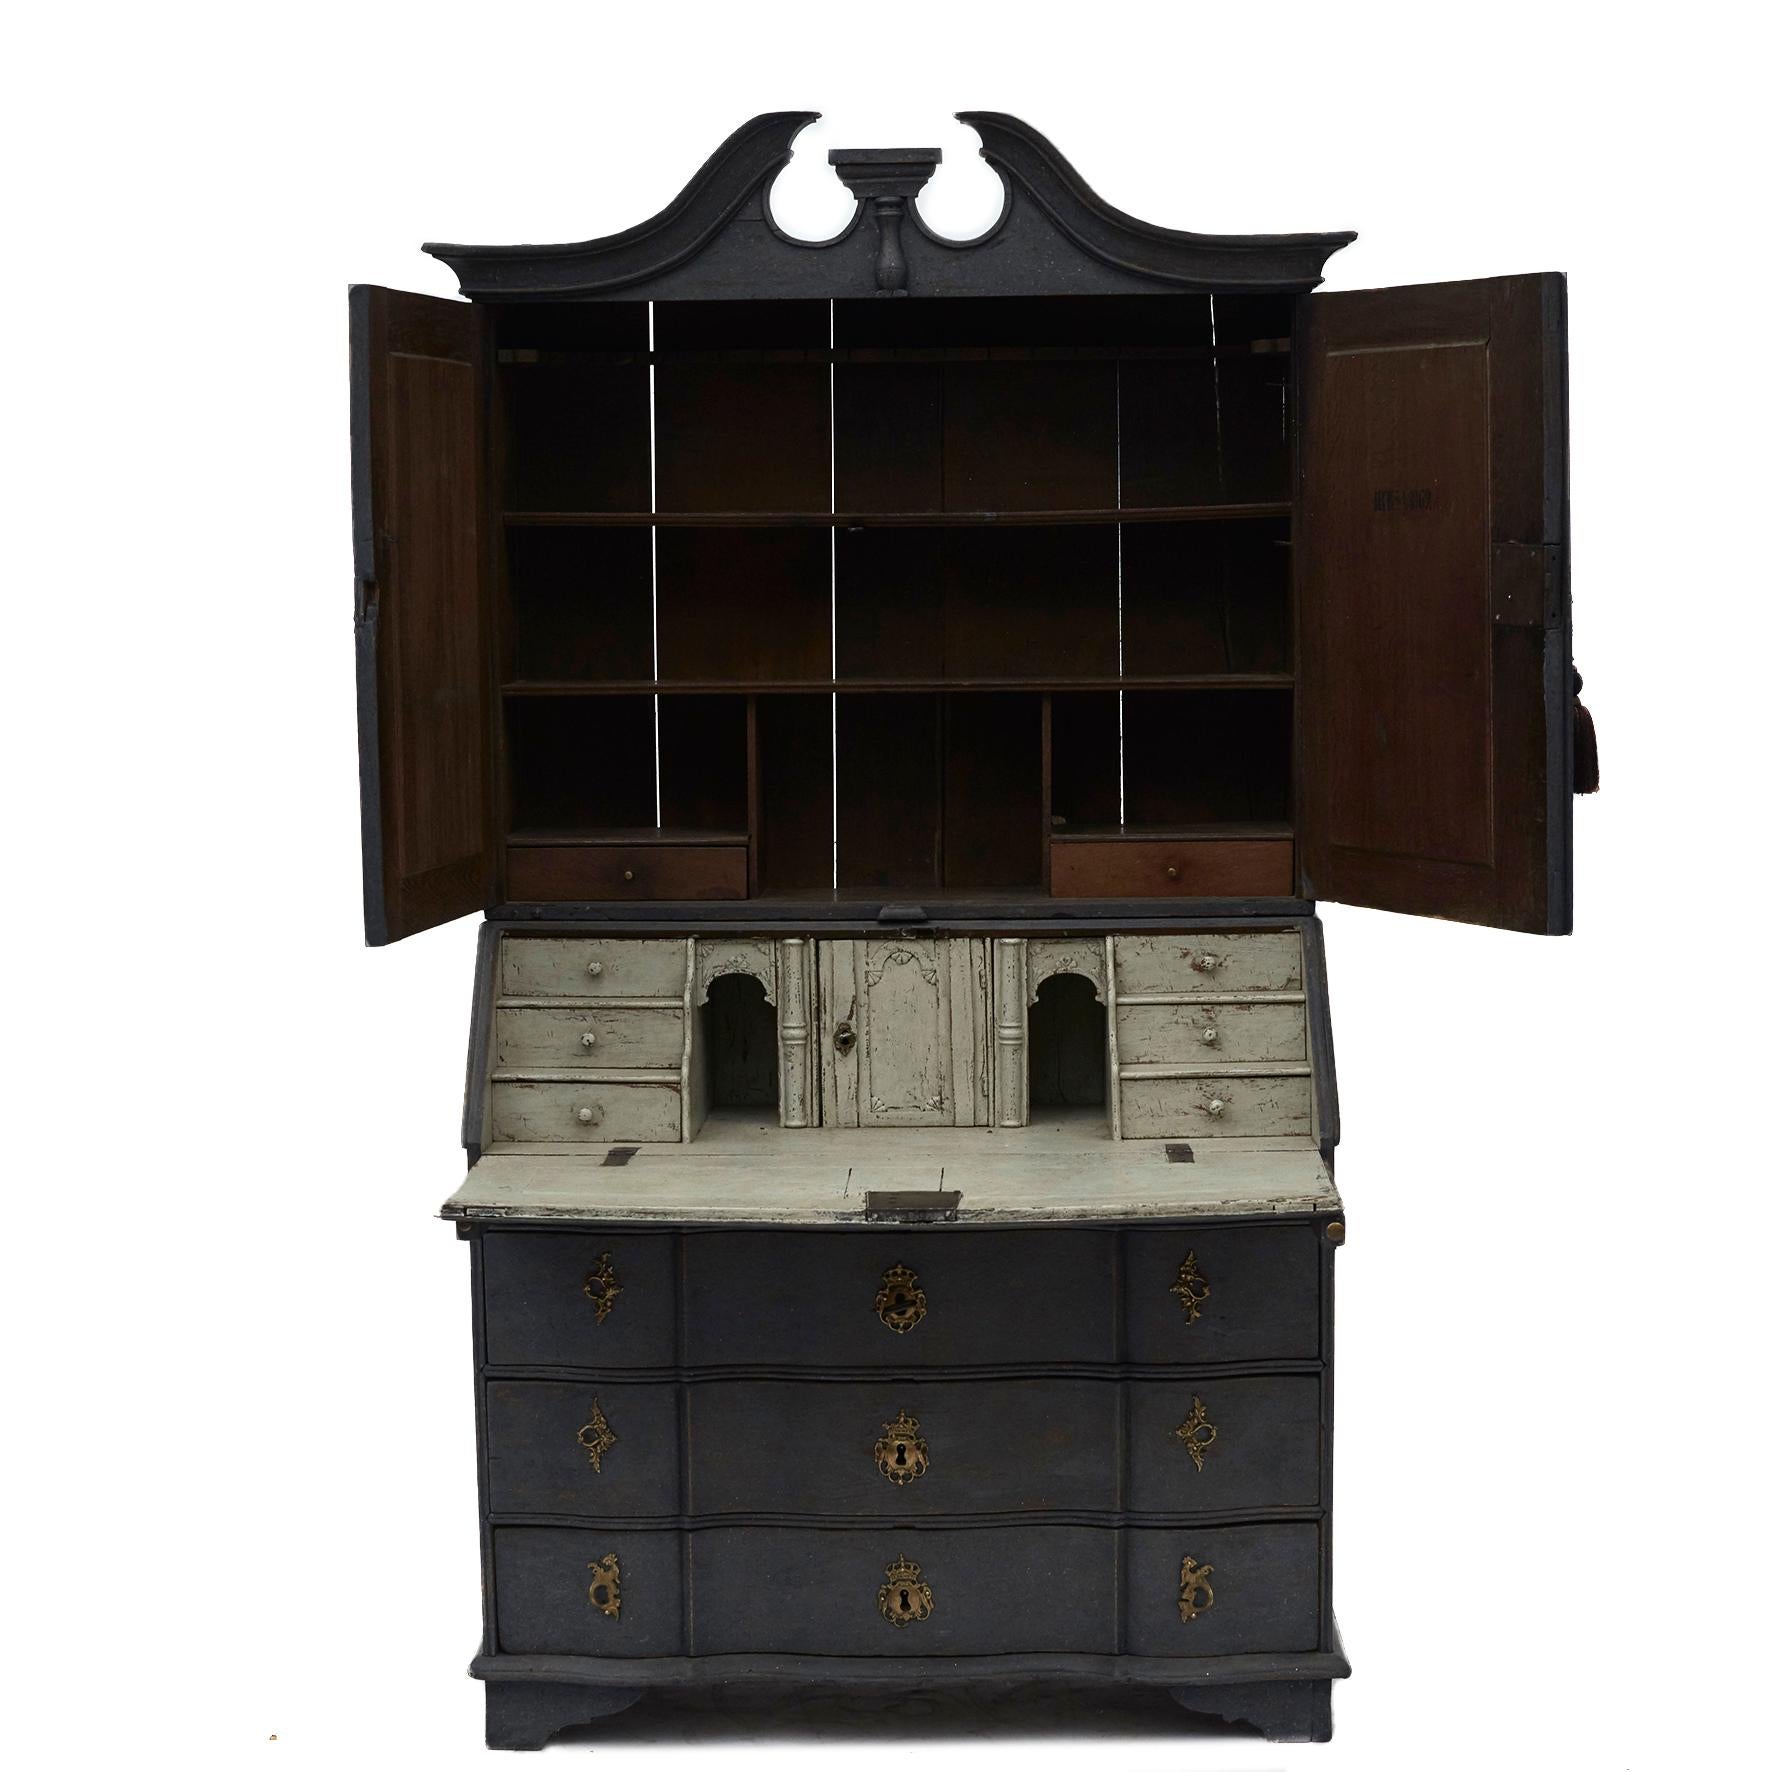 Danish baroque bureau in two parts in oak, painted in dark grey.
Upper cupboard with swan neck top and a pair of baroque doors with fillings. Lower part with four drawers (three large and one smaller) 
Straight split front. 
Above drawers slanted